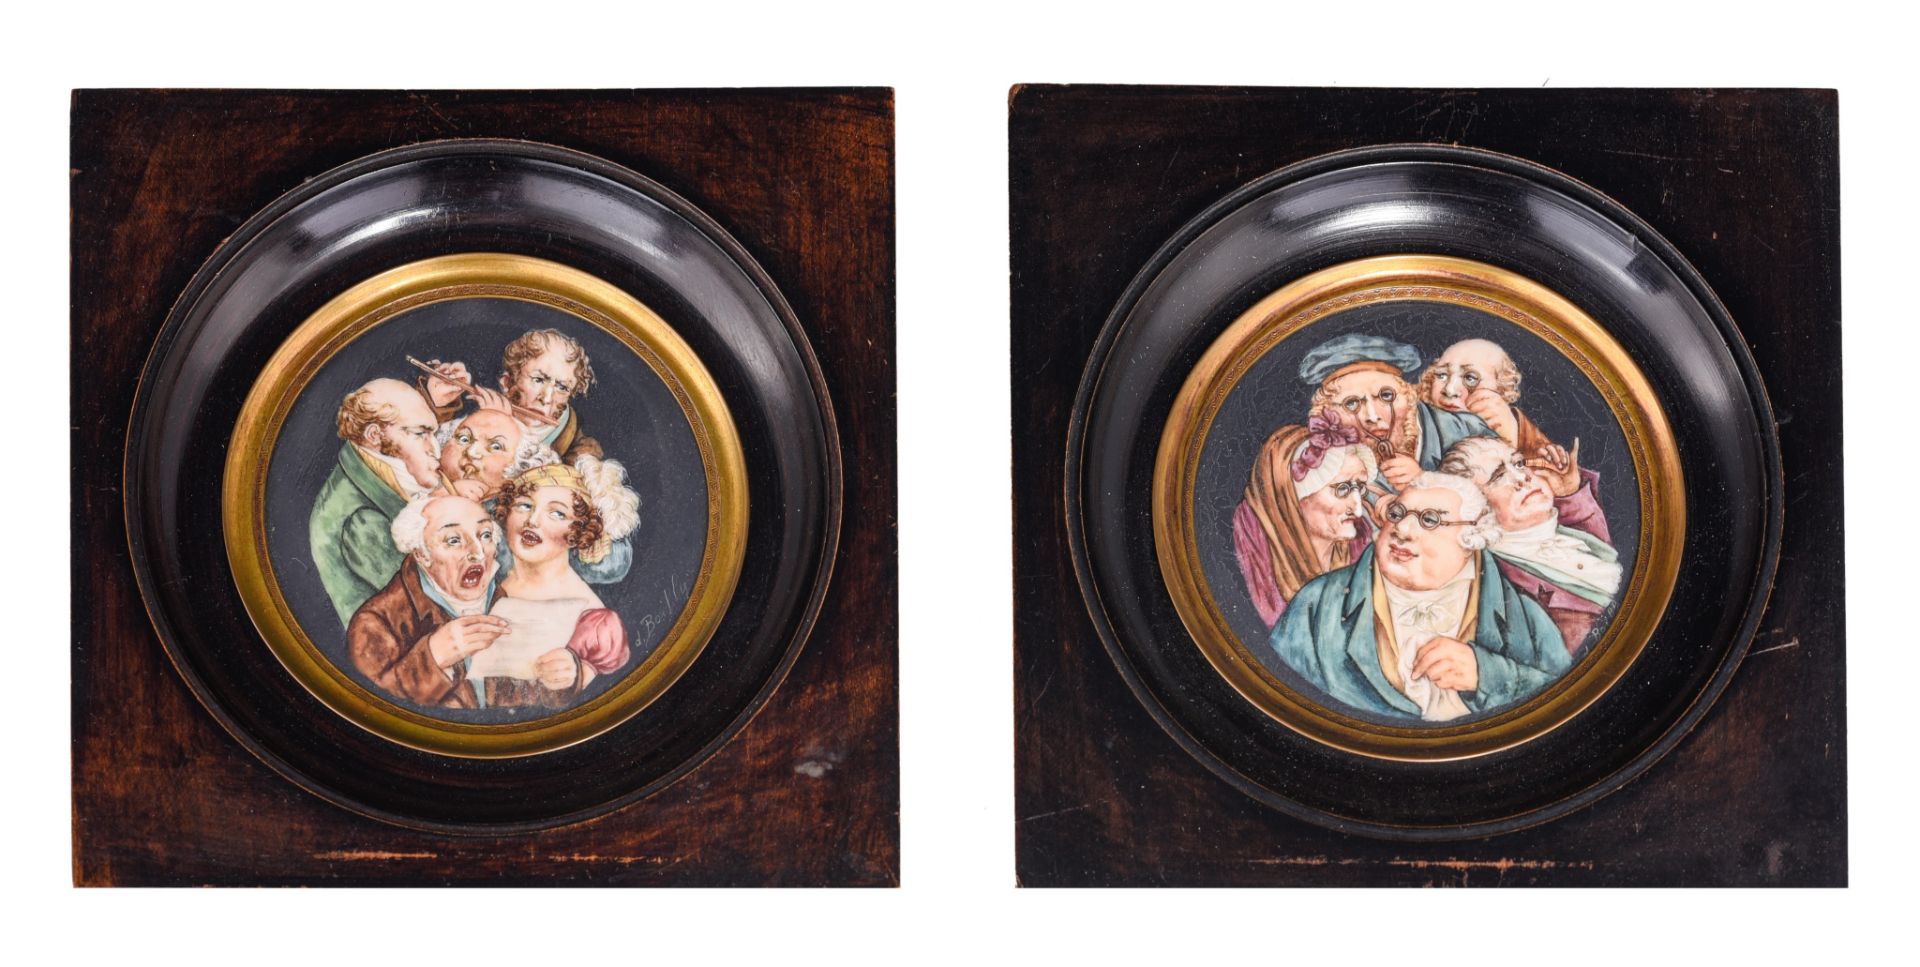 (BIDDING ONLY ON CARLOBONTE.BE) A pair of miniatures after lithographs by Louis Leopold Boilly (1761